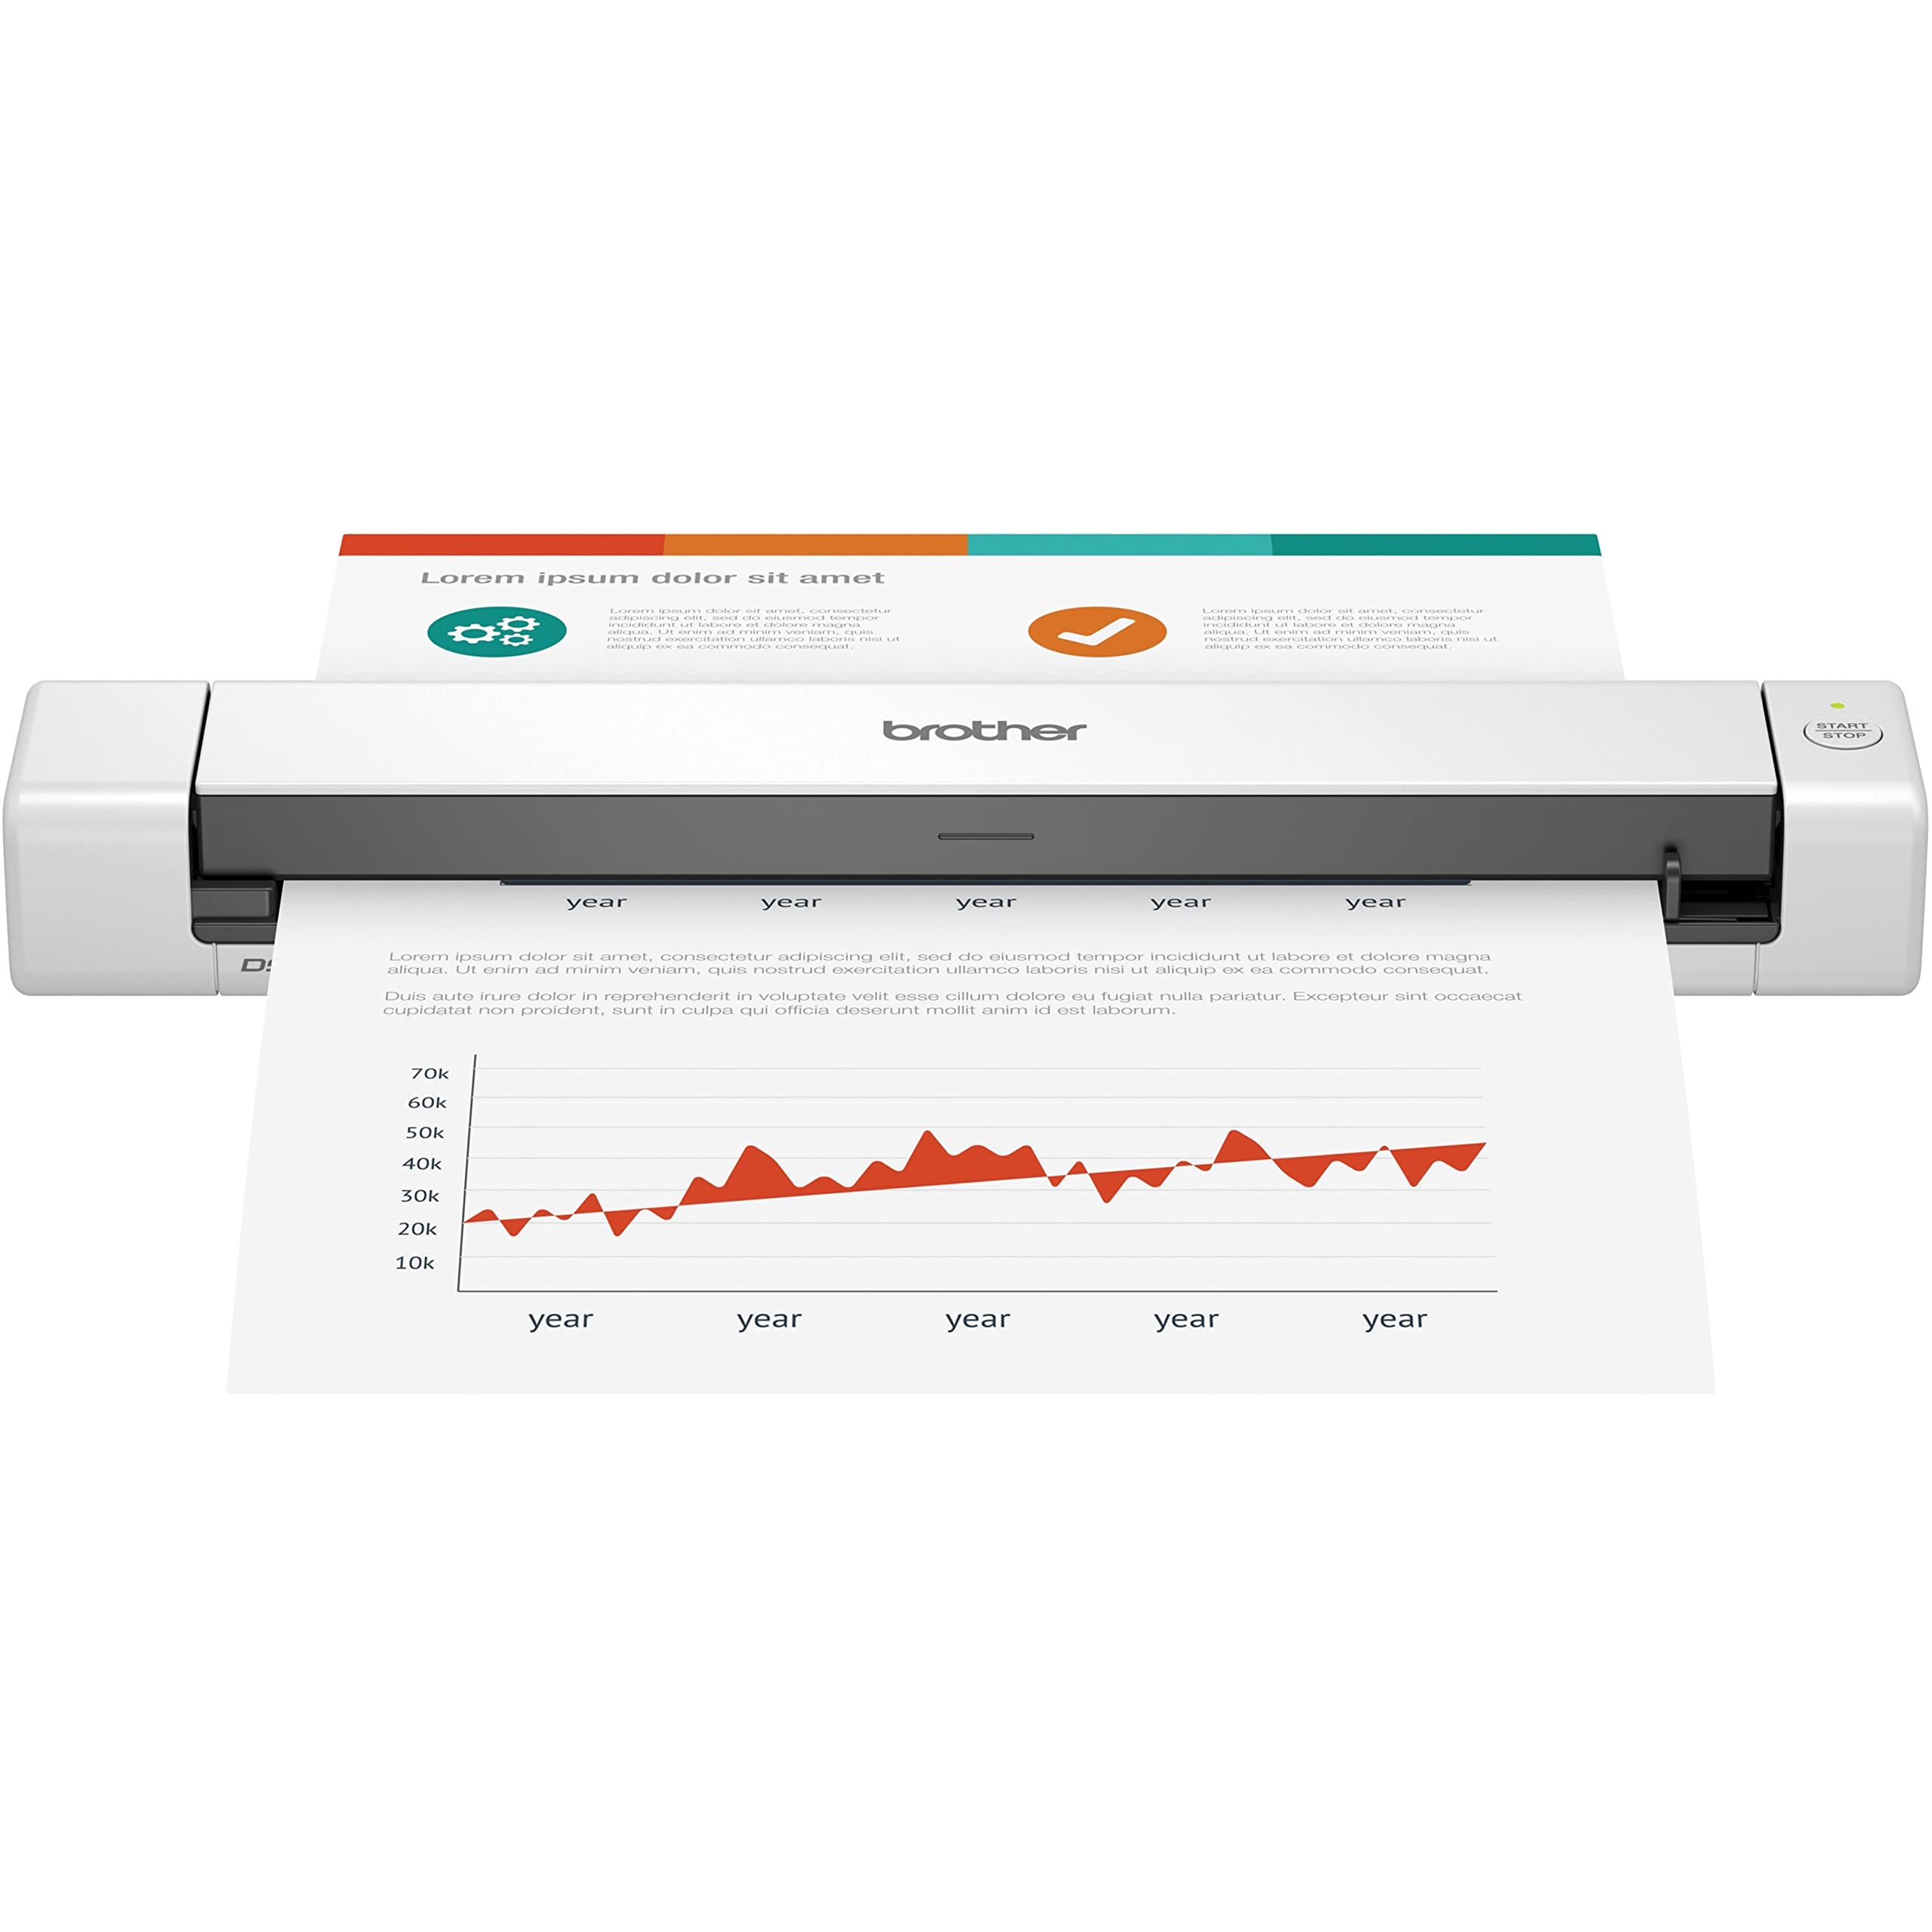 Brother Compact Mobile Document Scanner